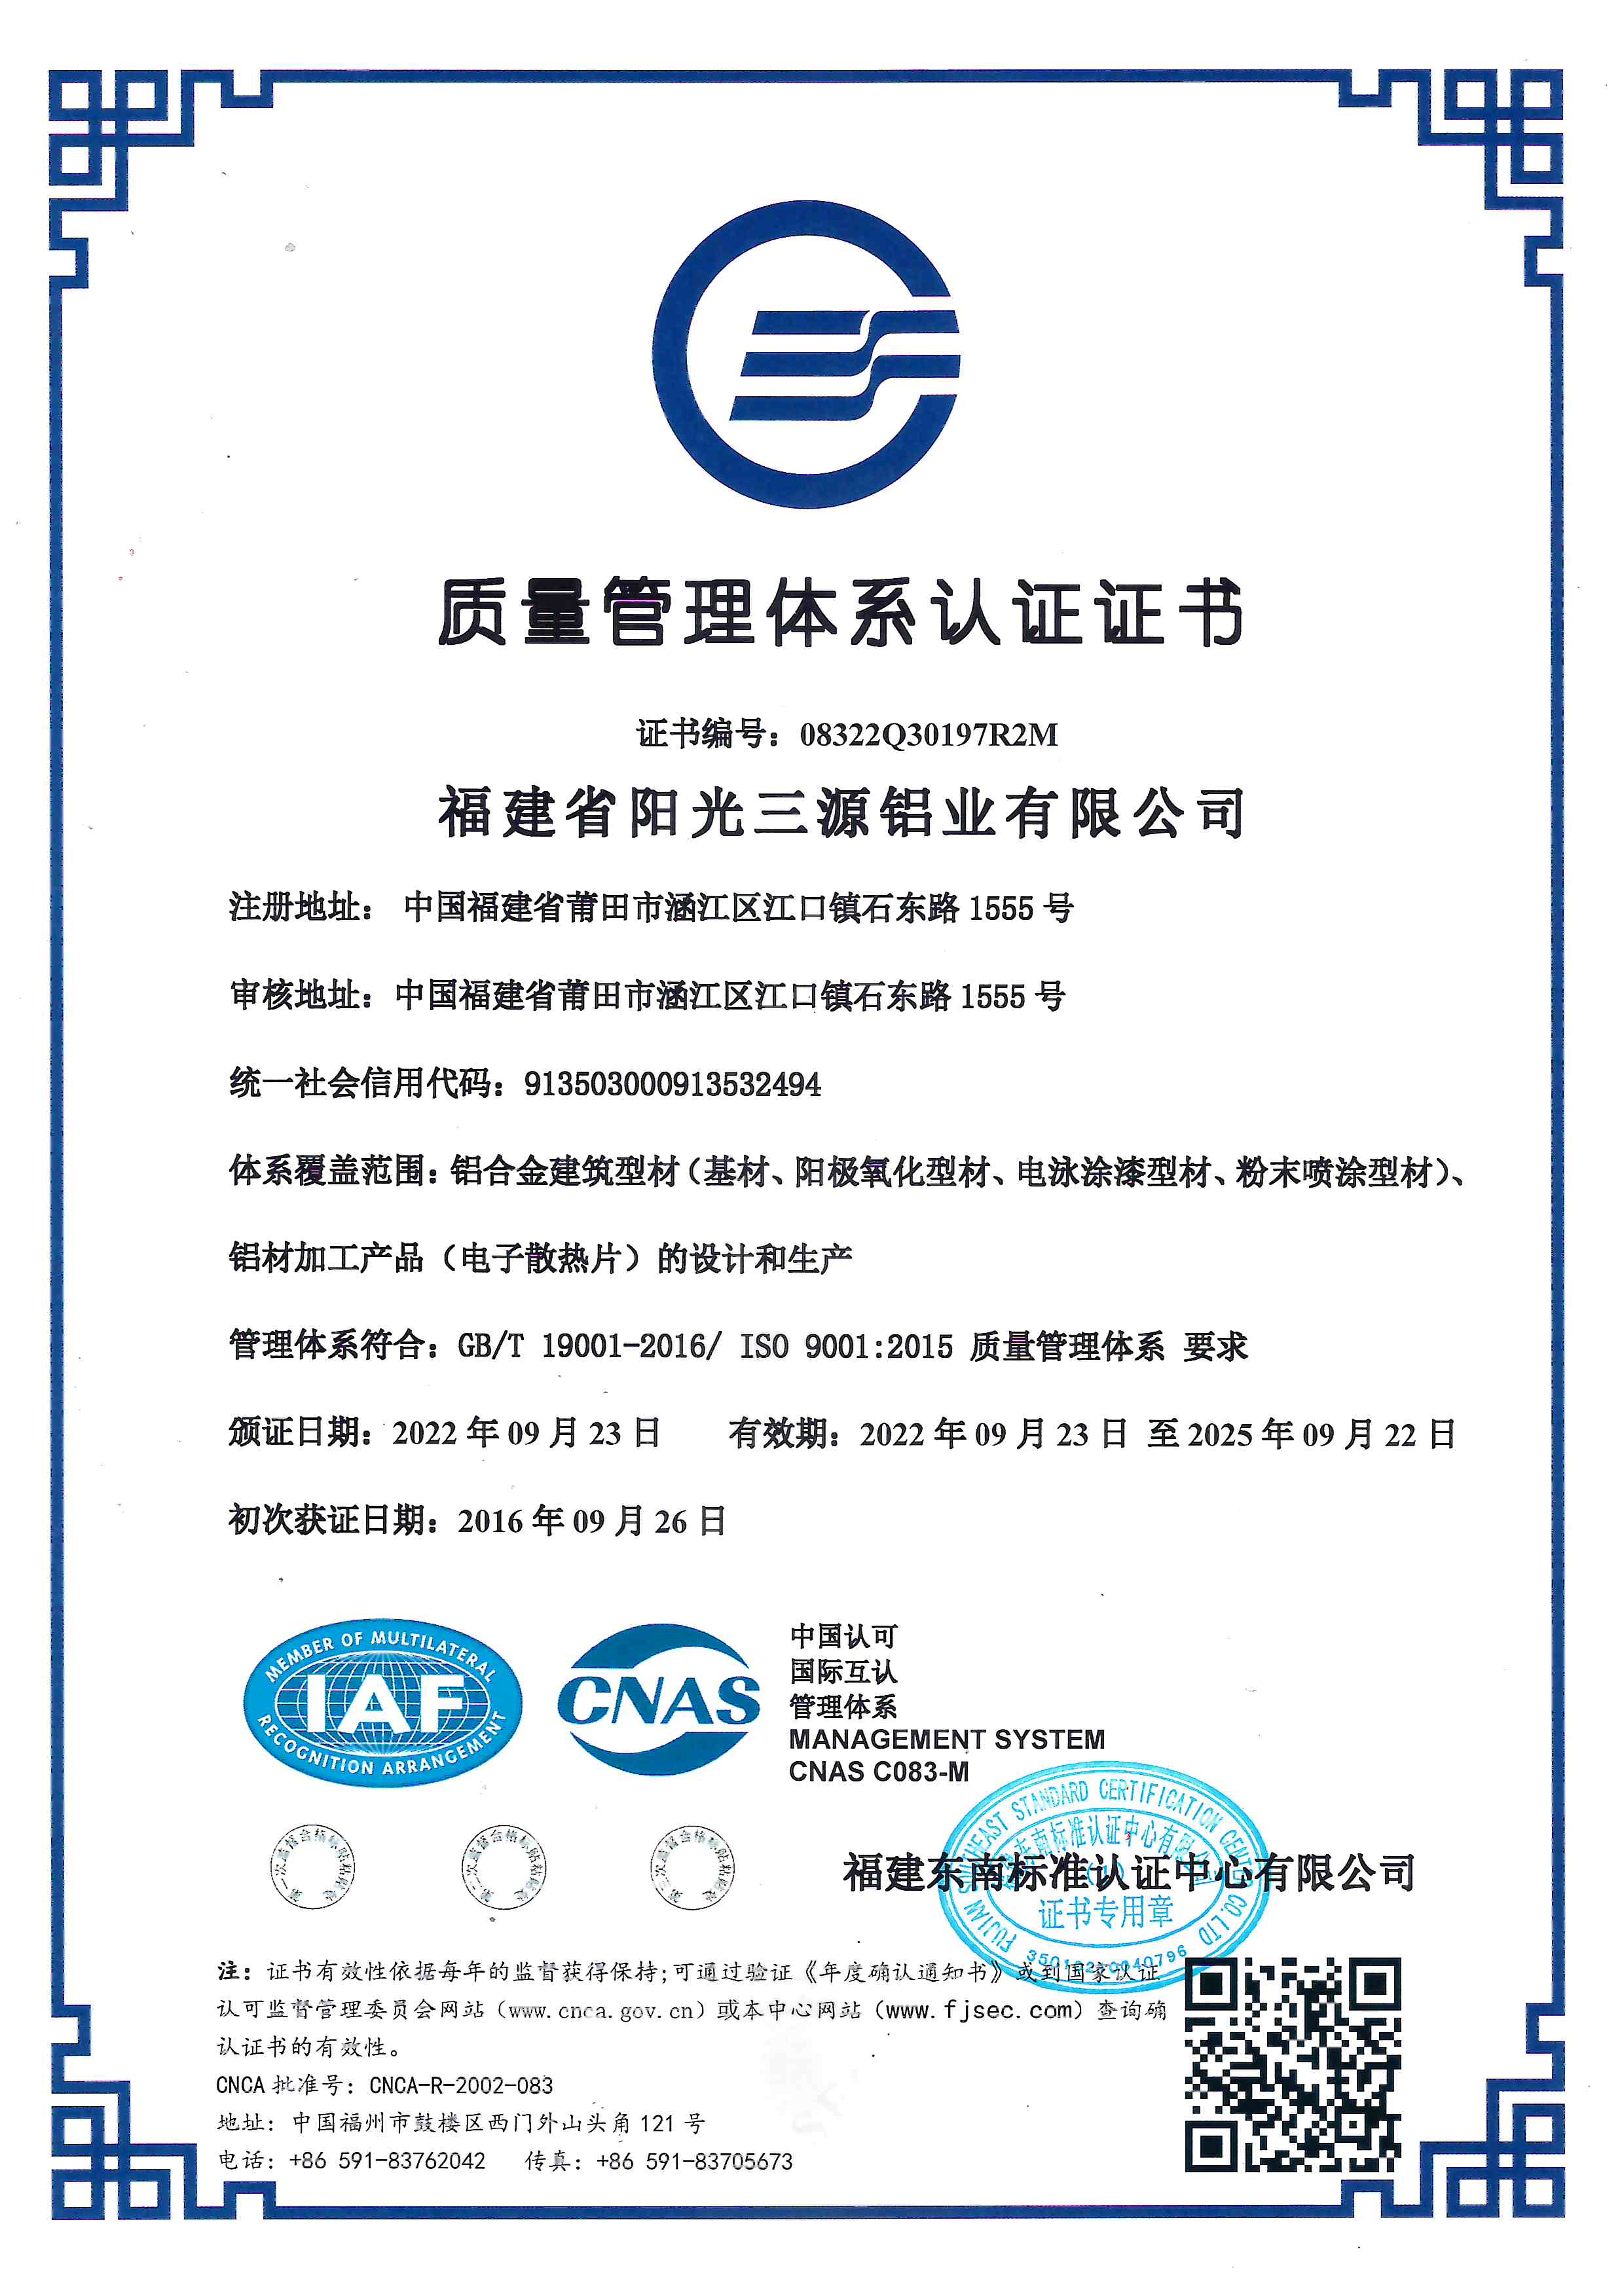 Certificate of quality system